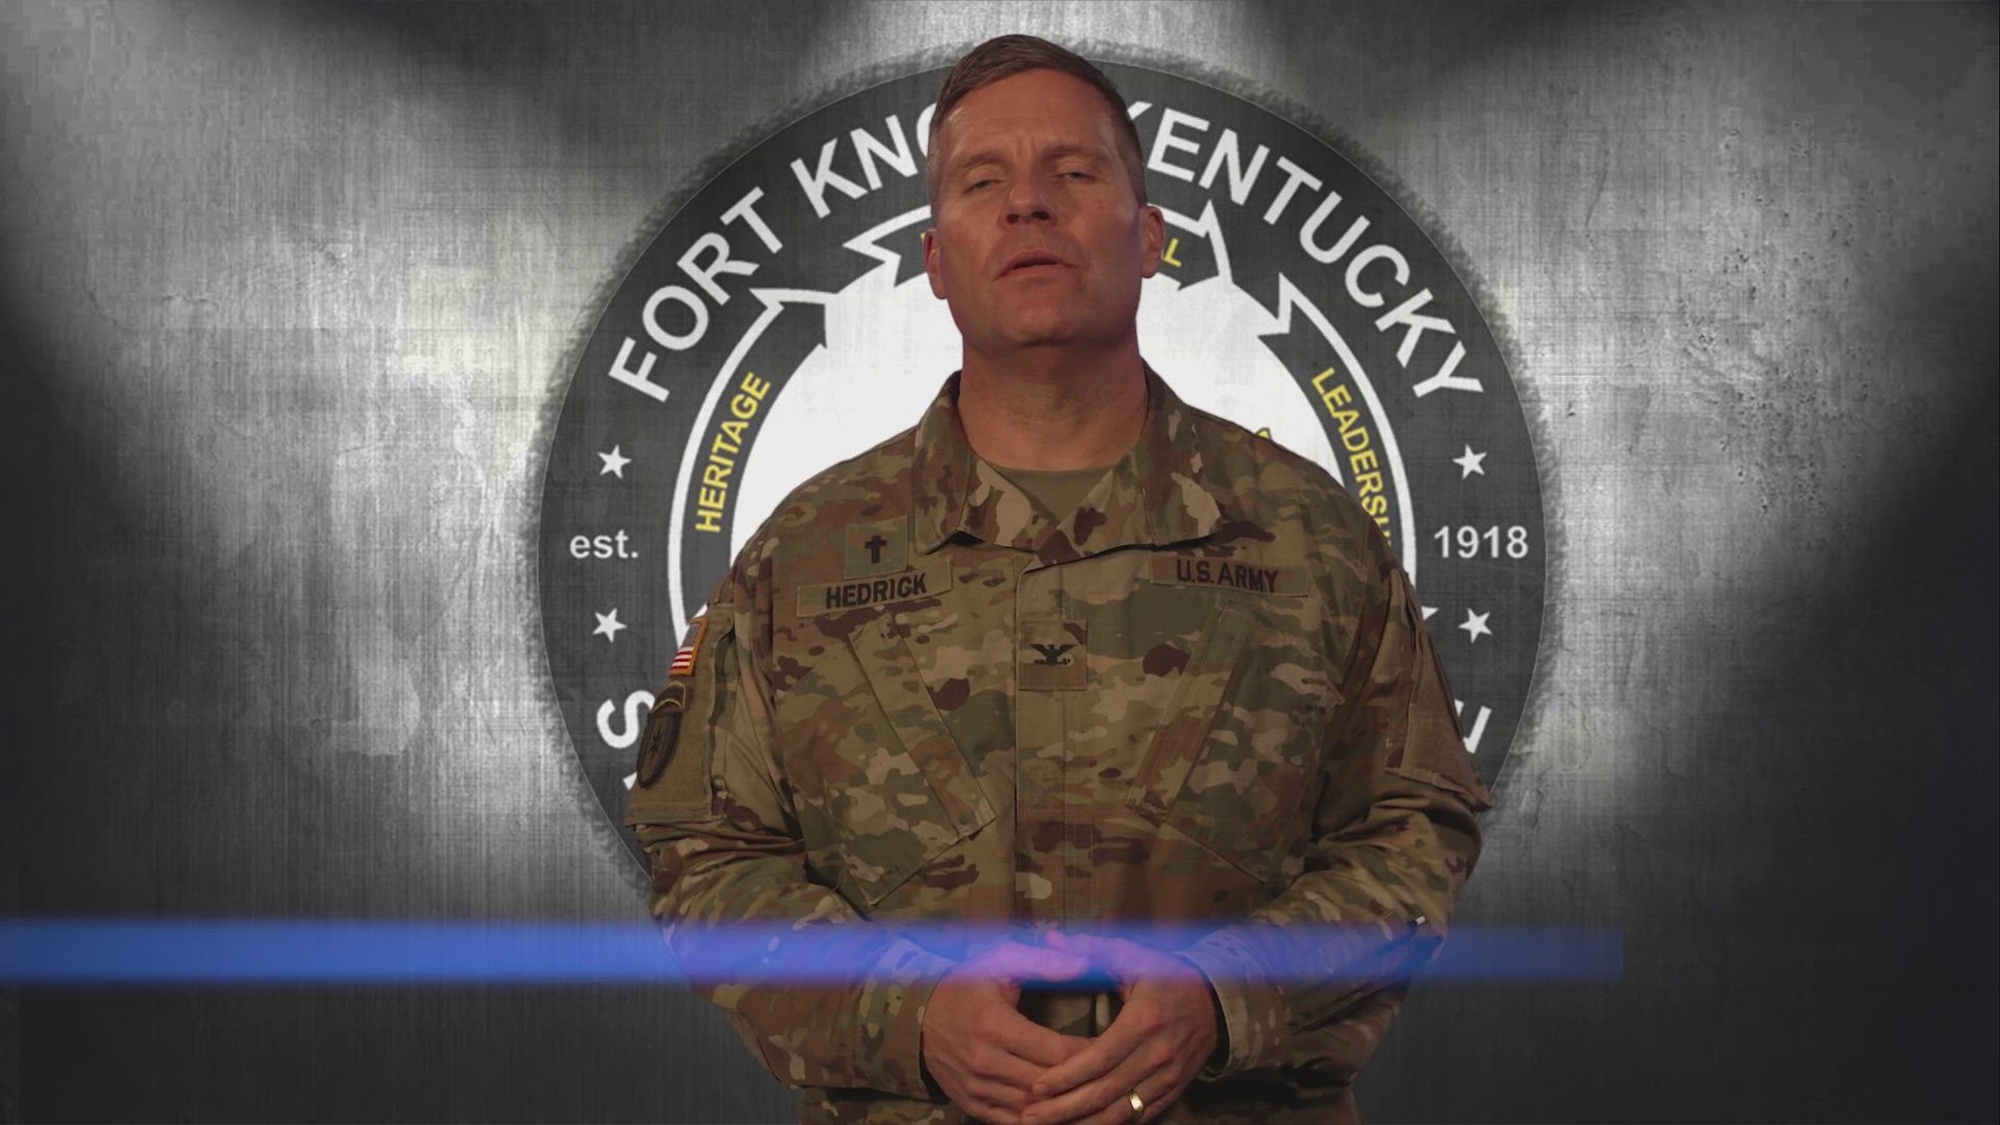 CH Col Doug Hedrick, Command Chaplain of the Army Reserve Aviation
Command, shares the importance of gratitude and a healthy perspective on
life.